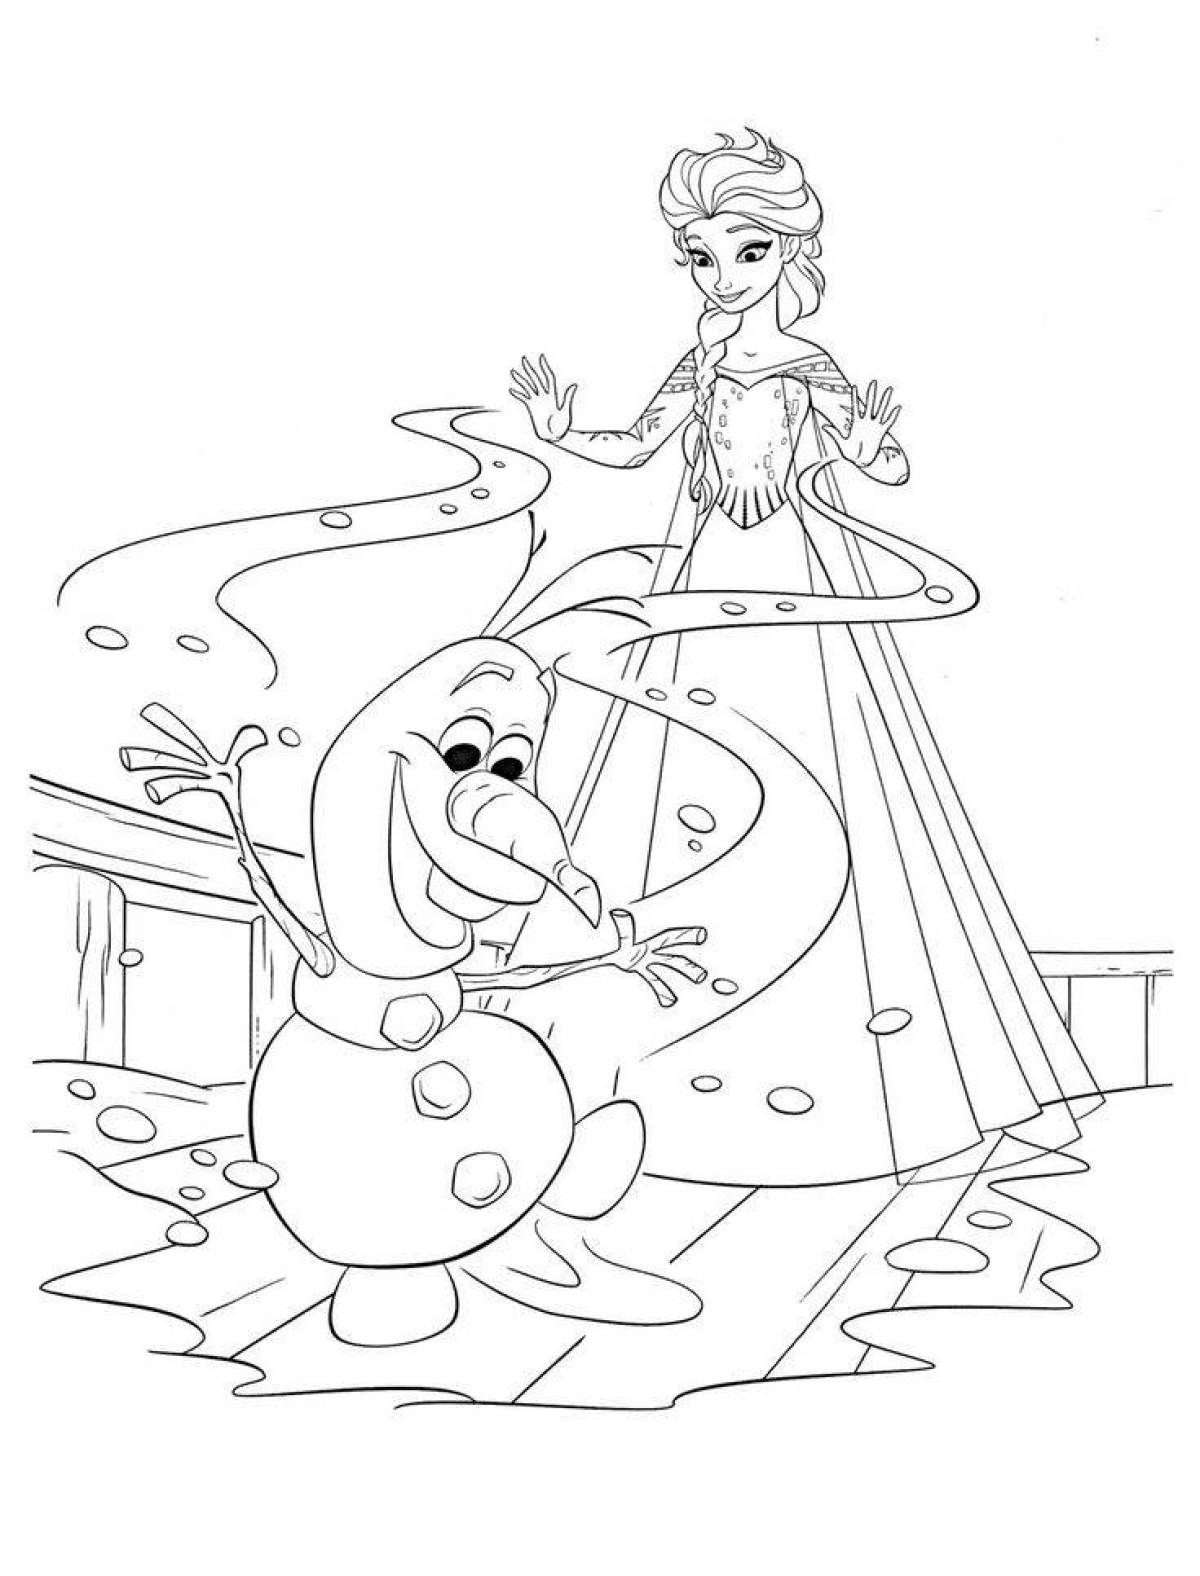 Frozen coloring page for girls